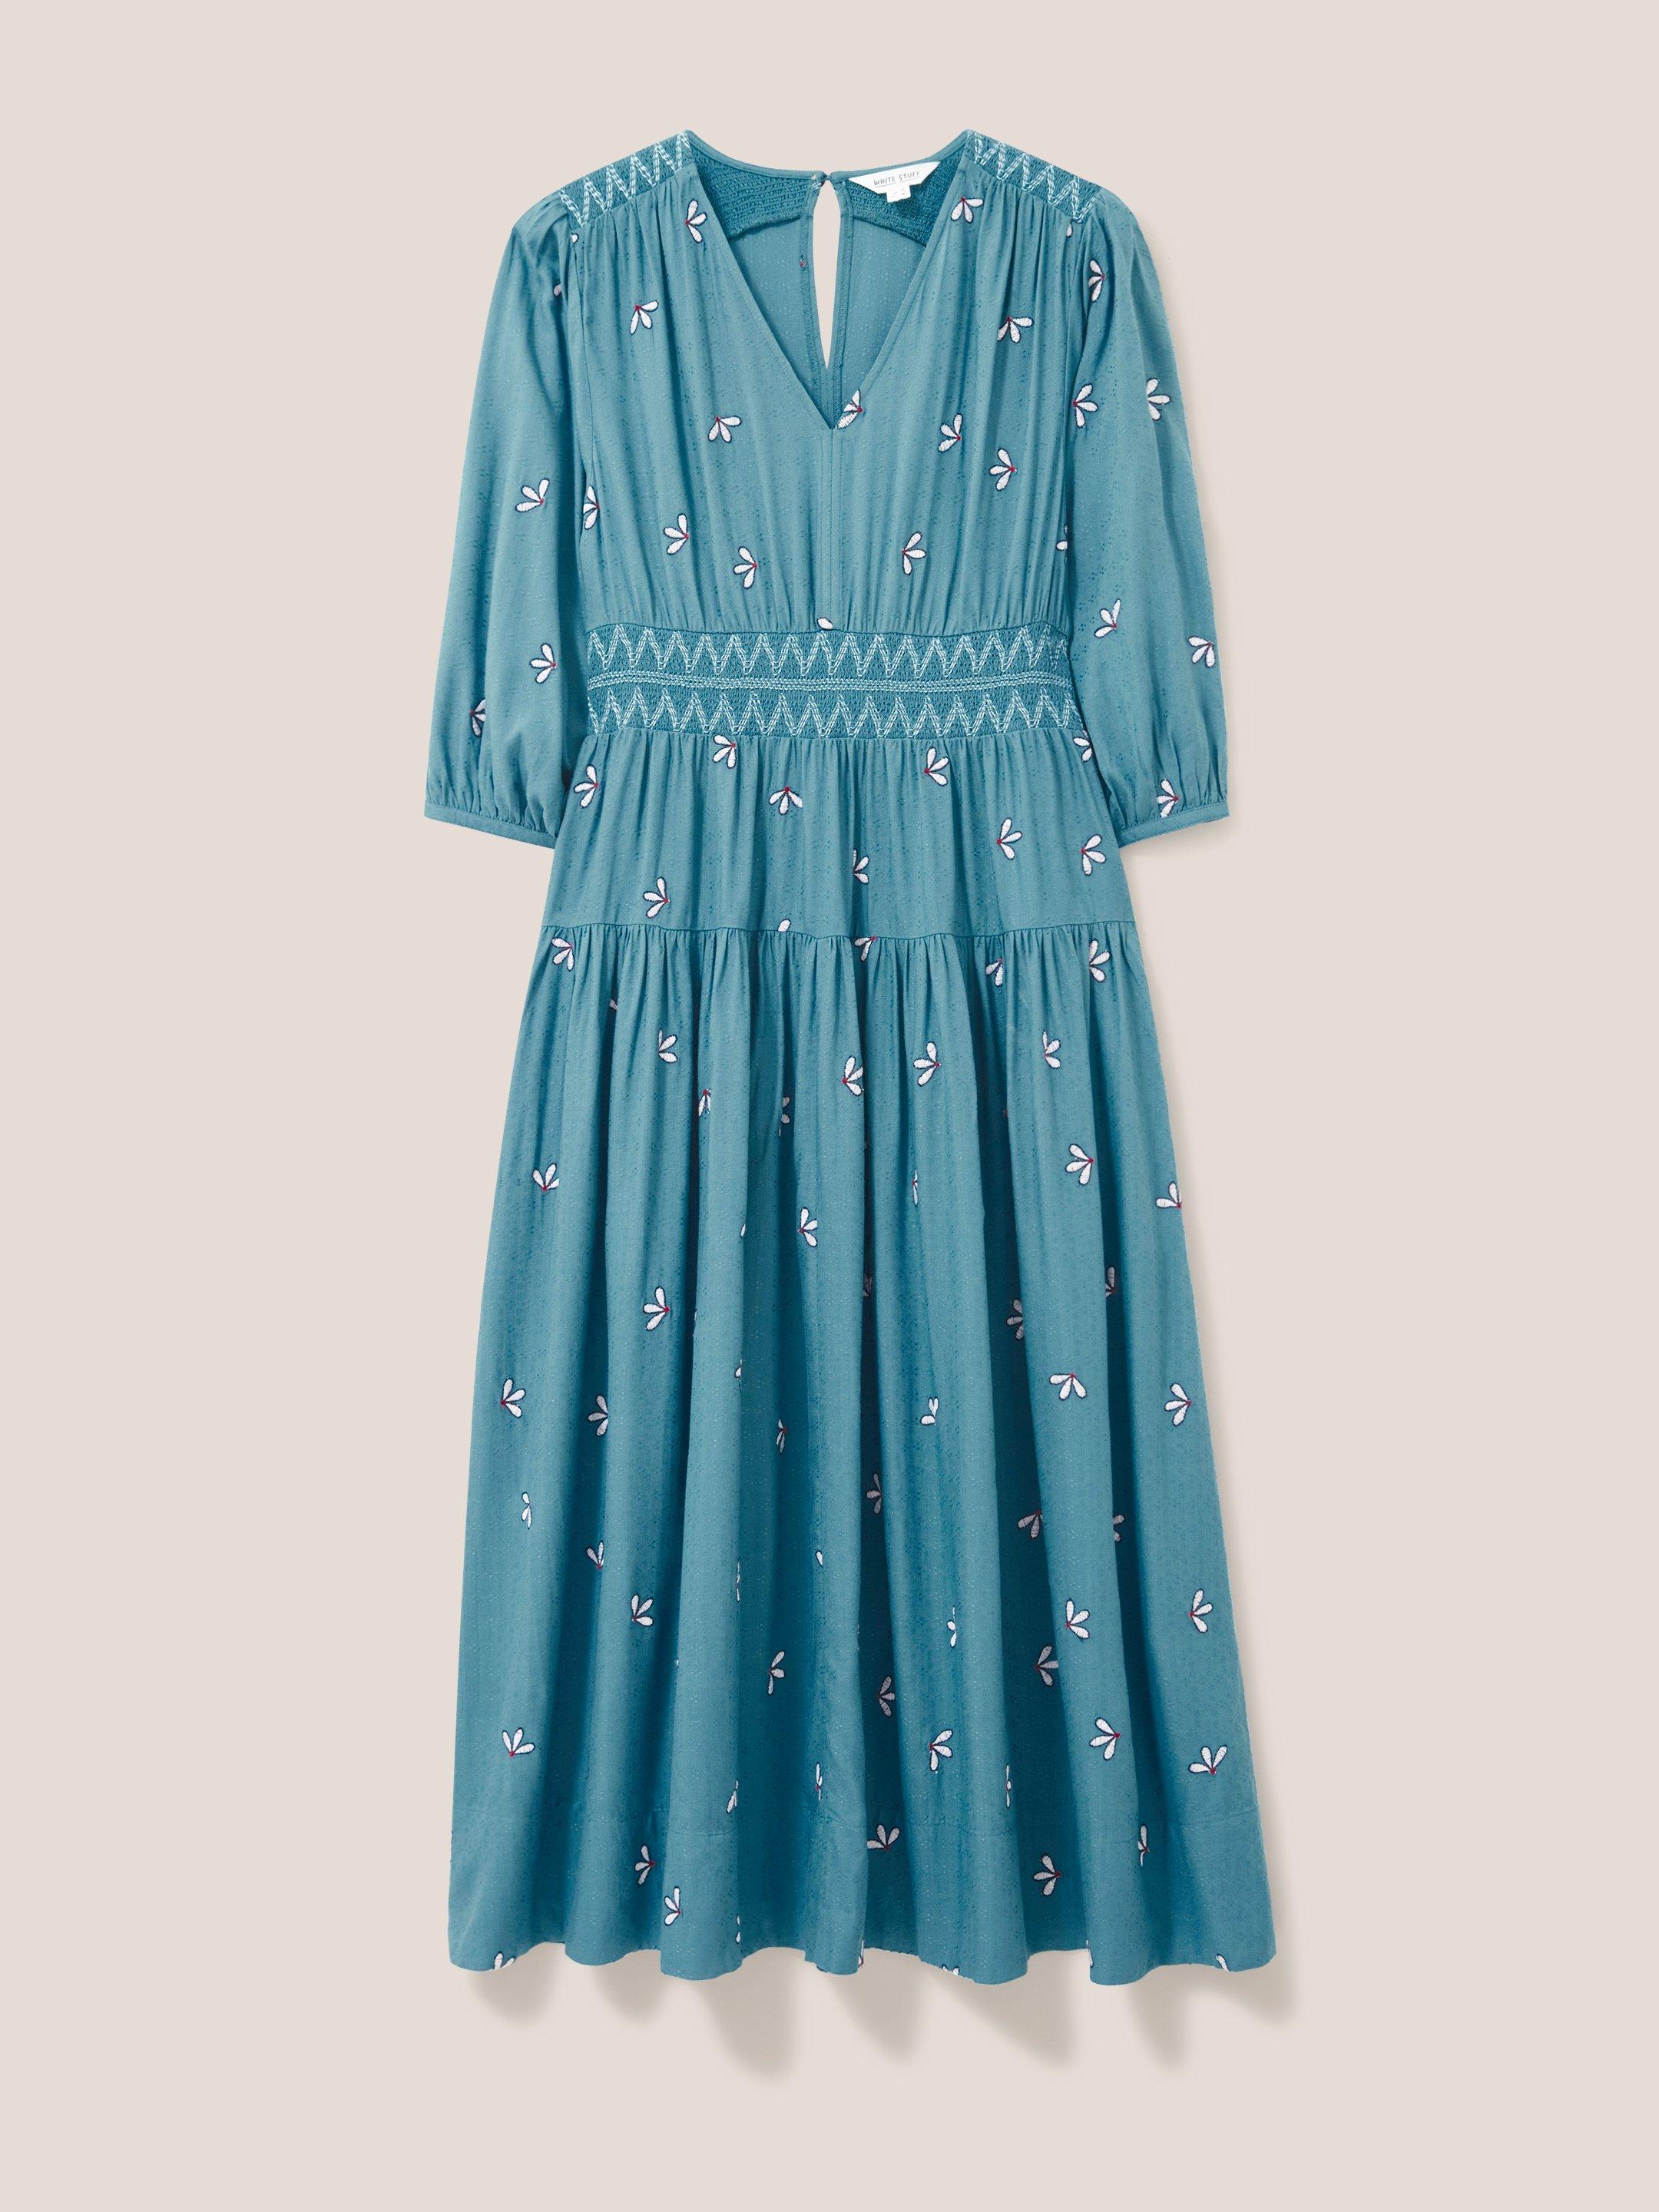 Maude Embroidered Dress in TEAL MLT - FLAT FRONT